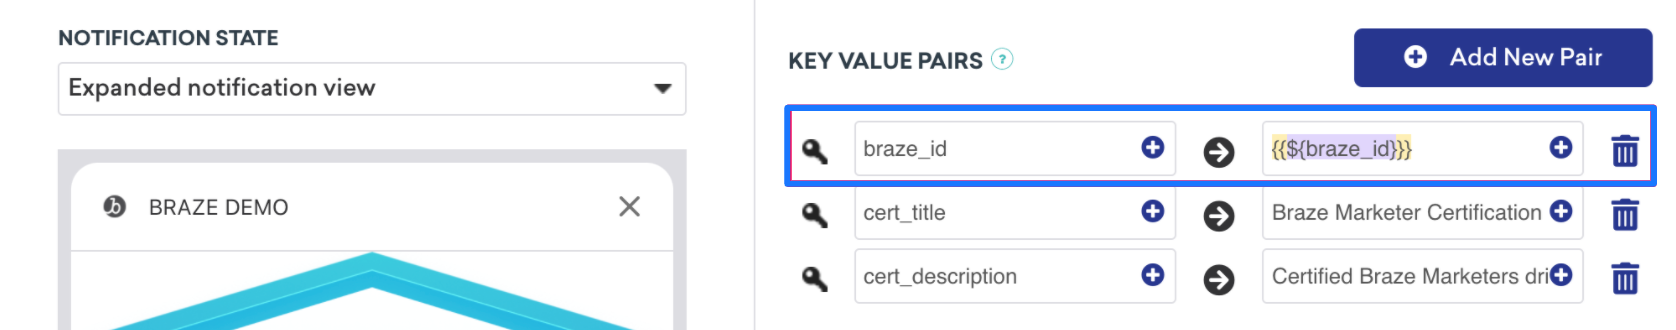 A push message with three sets of key-value pairs. 1. "Braze_id" set as a Liquid call to retrieve Braze ID. 2. "cert_title" set as "Braze Marketer Certificiation". 3. "Cert_decription" set as "Certified Braze marketers drive...".